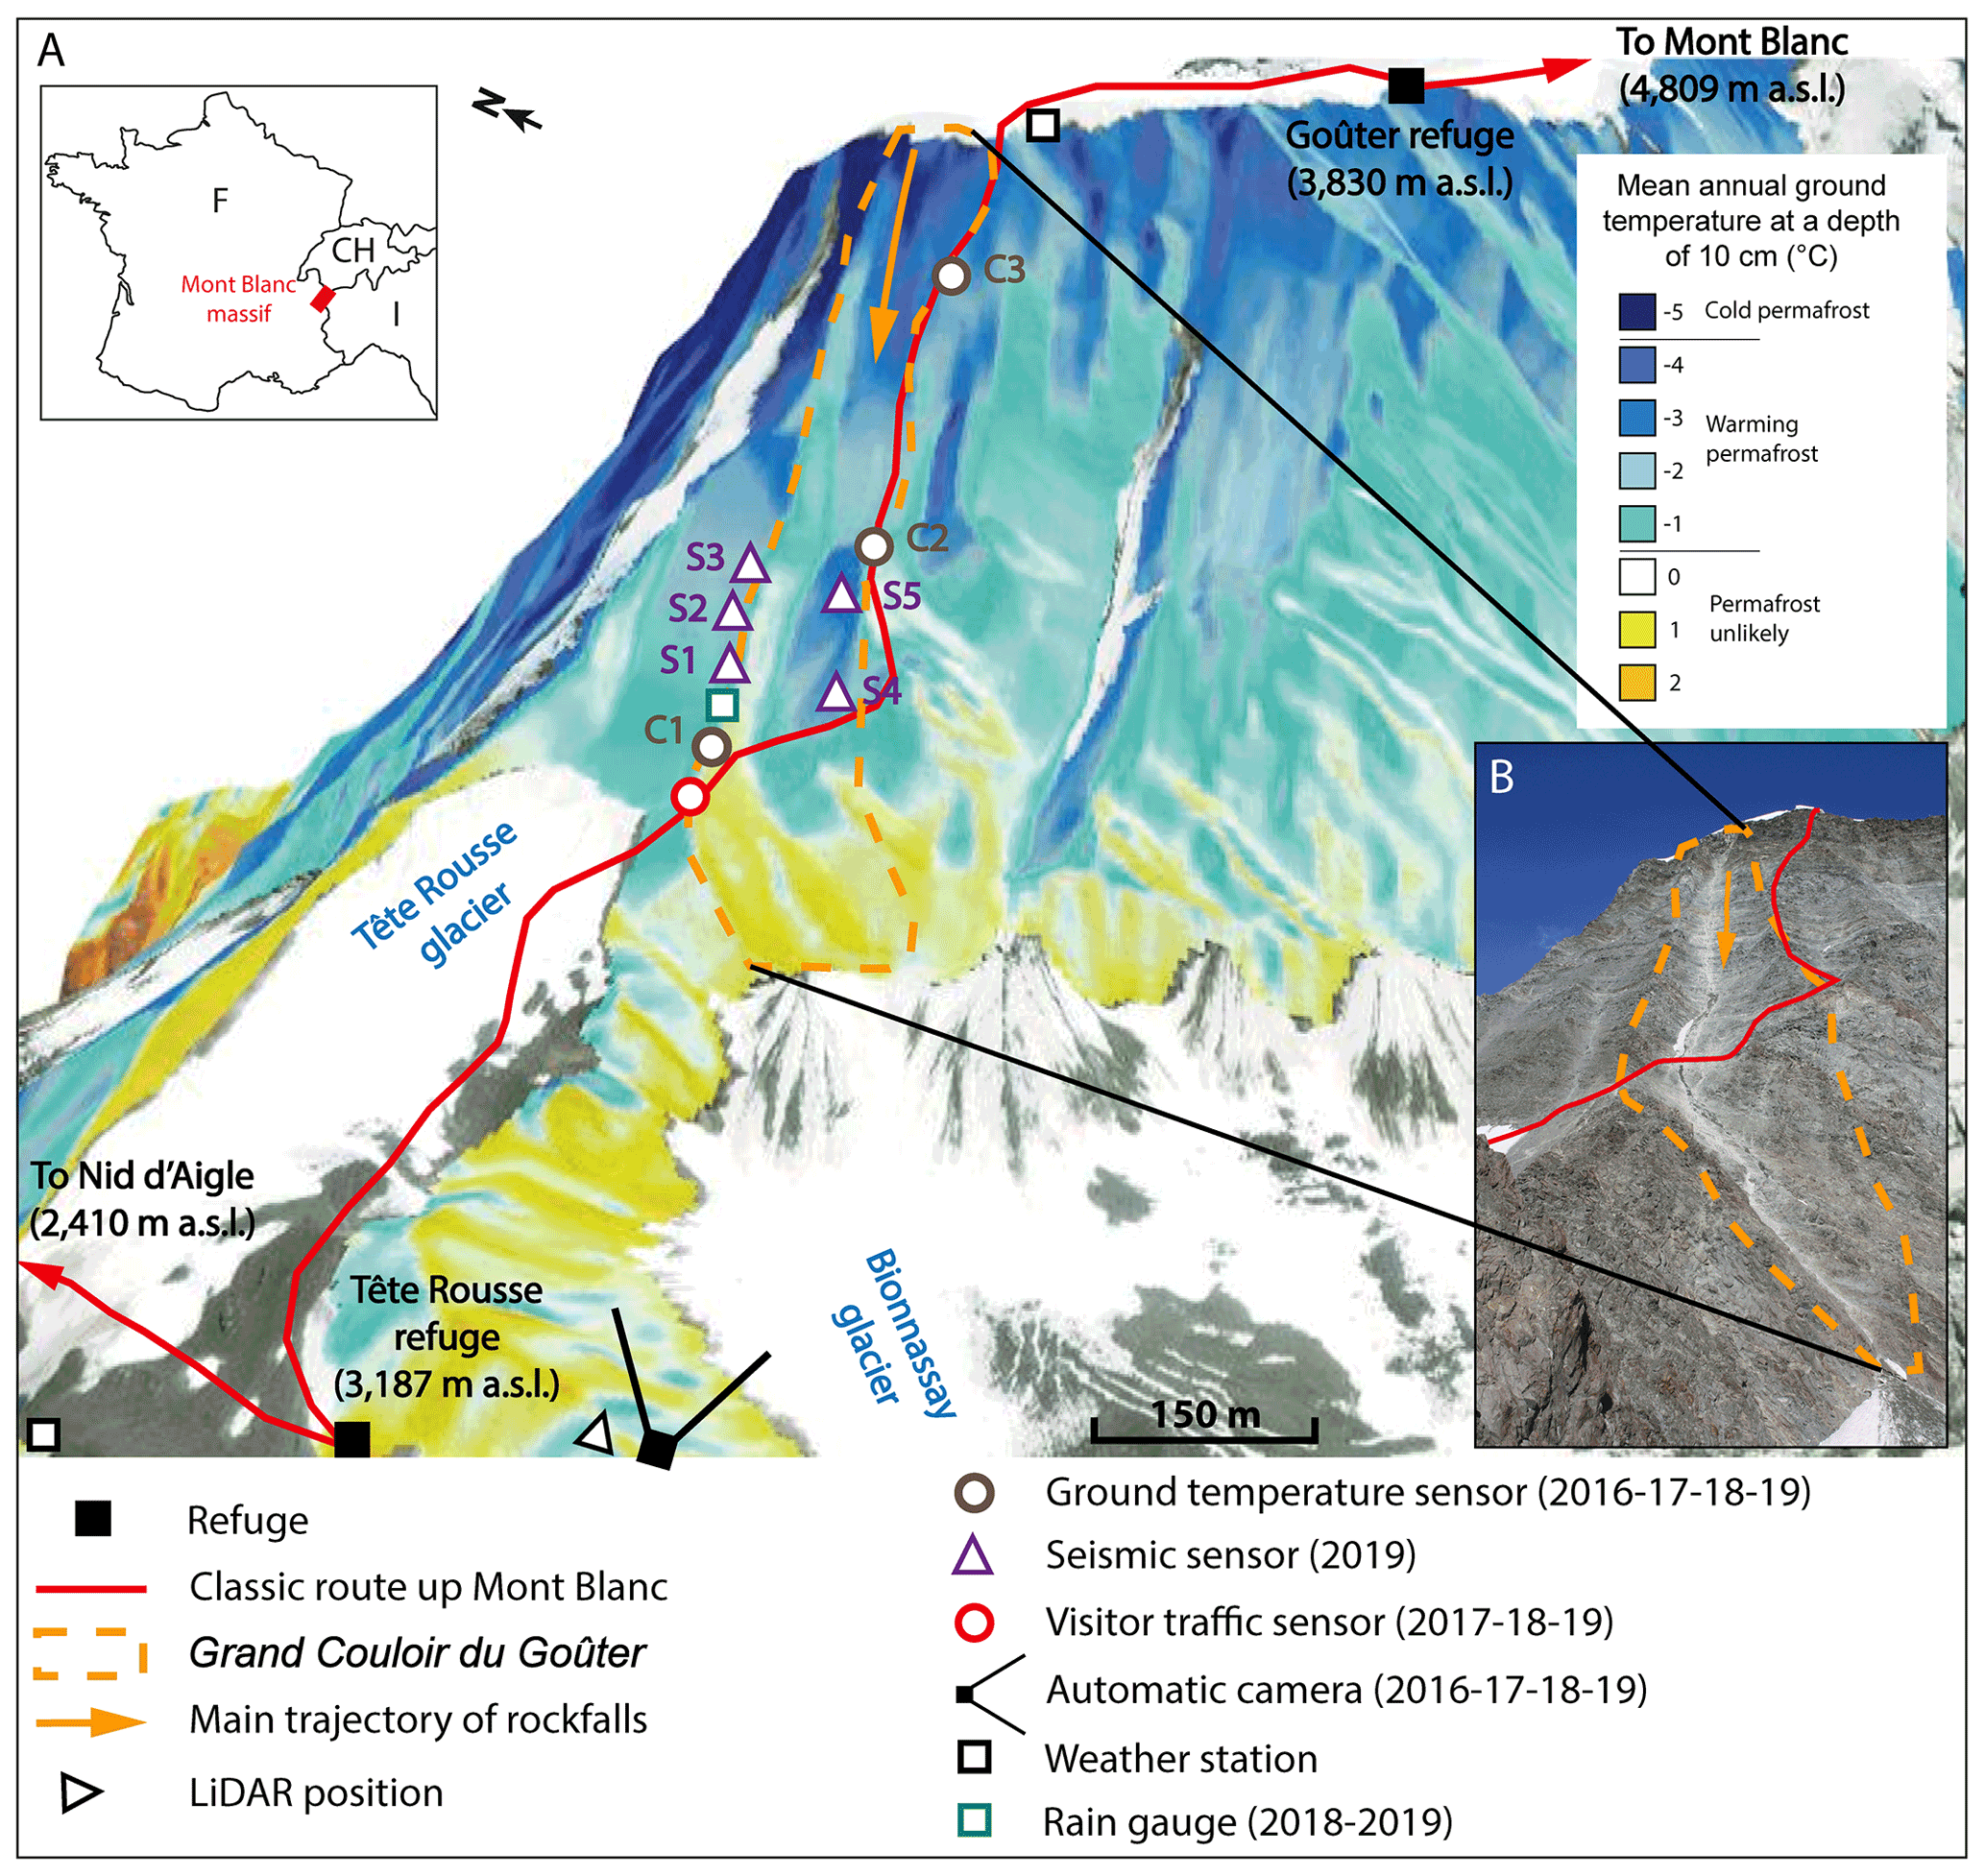 NHESS - Multi-method monitoring of rockfall activity along the classic  route up Mont Blanc (4809 m a.s.l.) to encourage adaptation by mountaineers